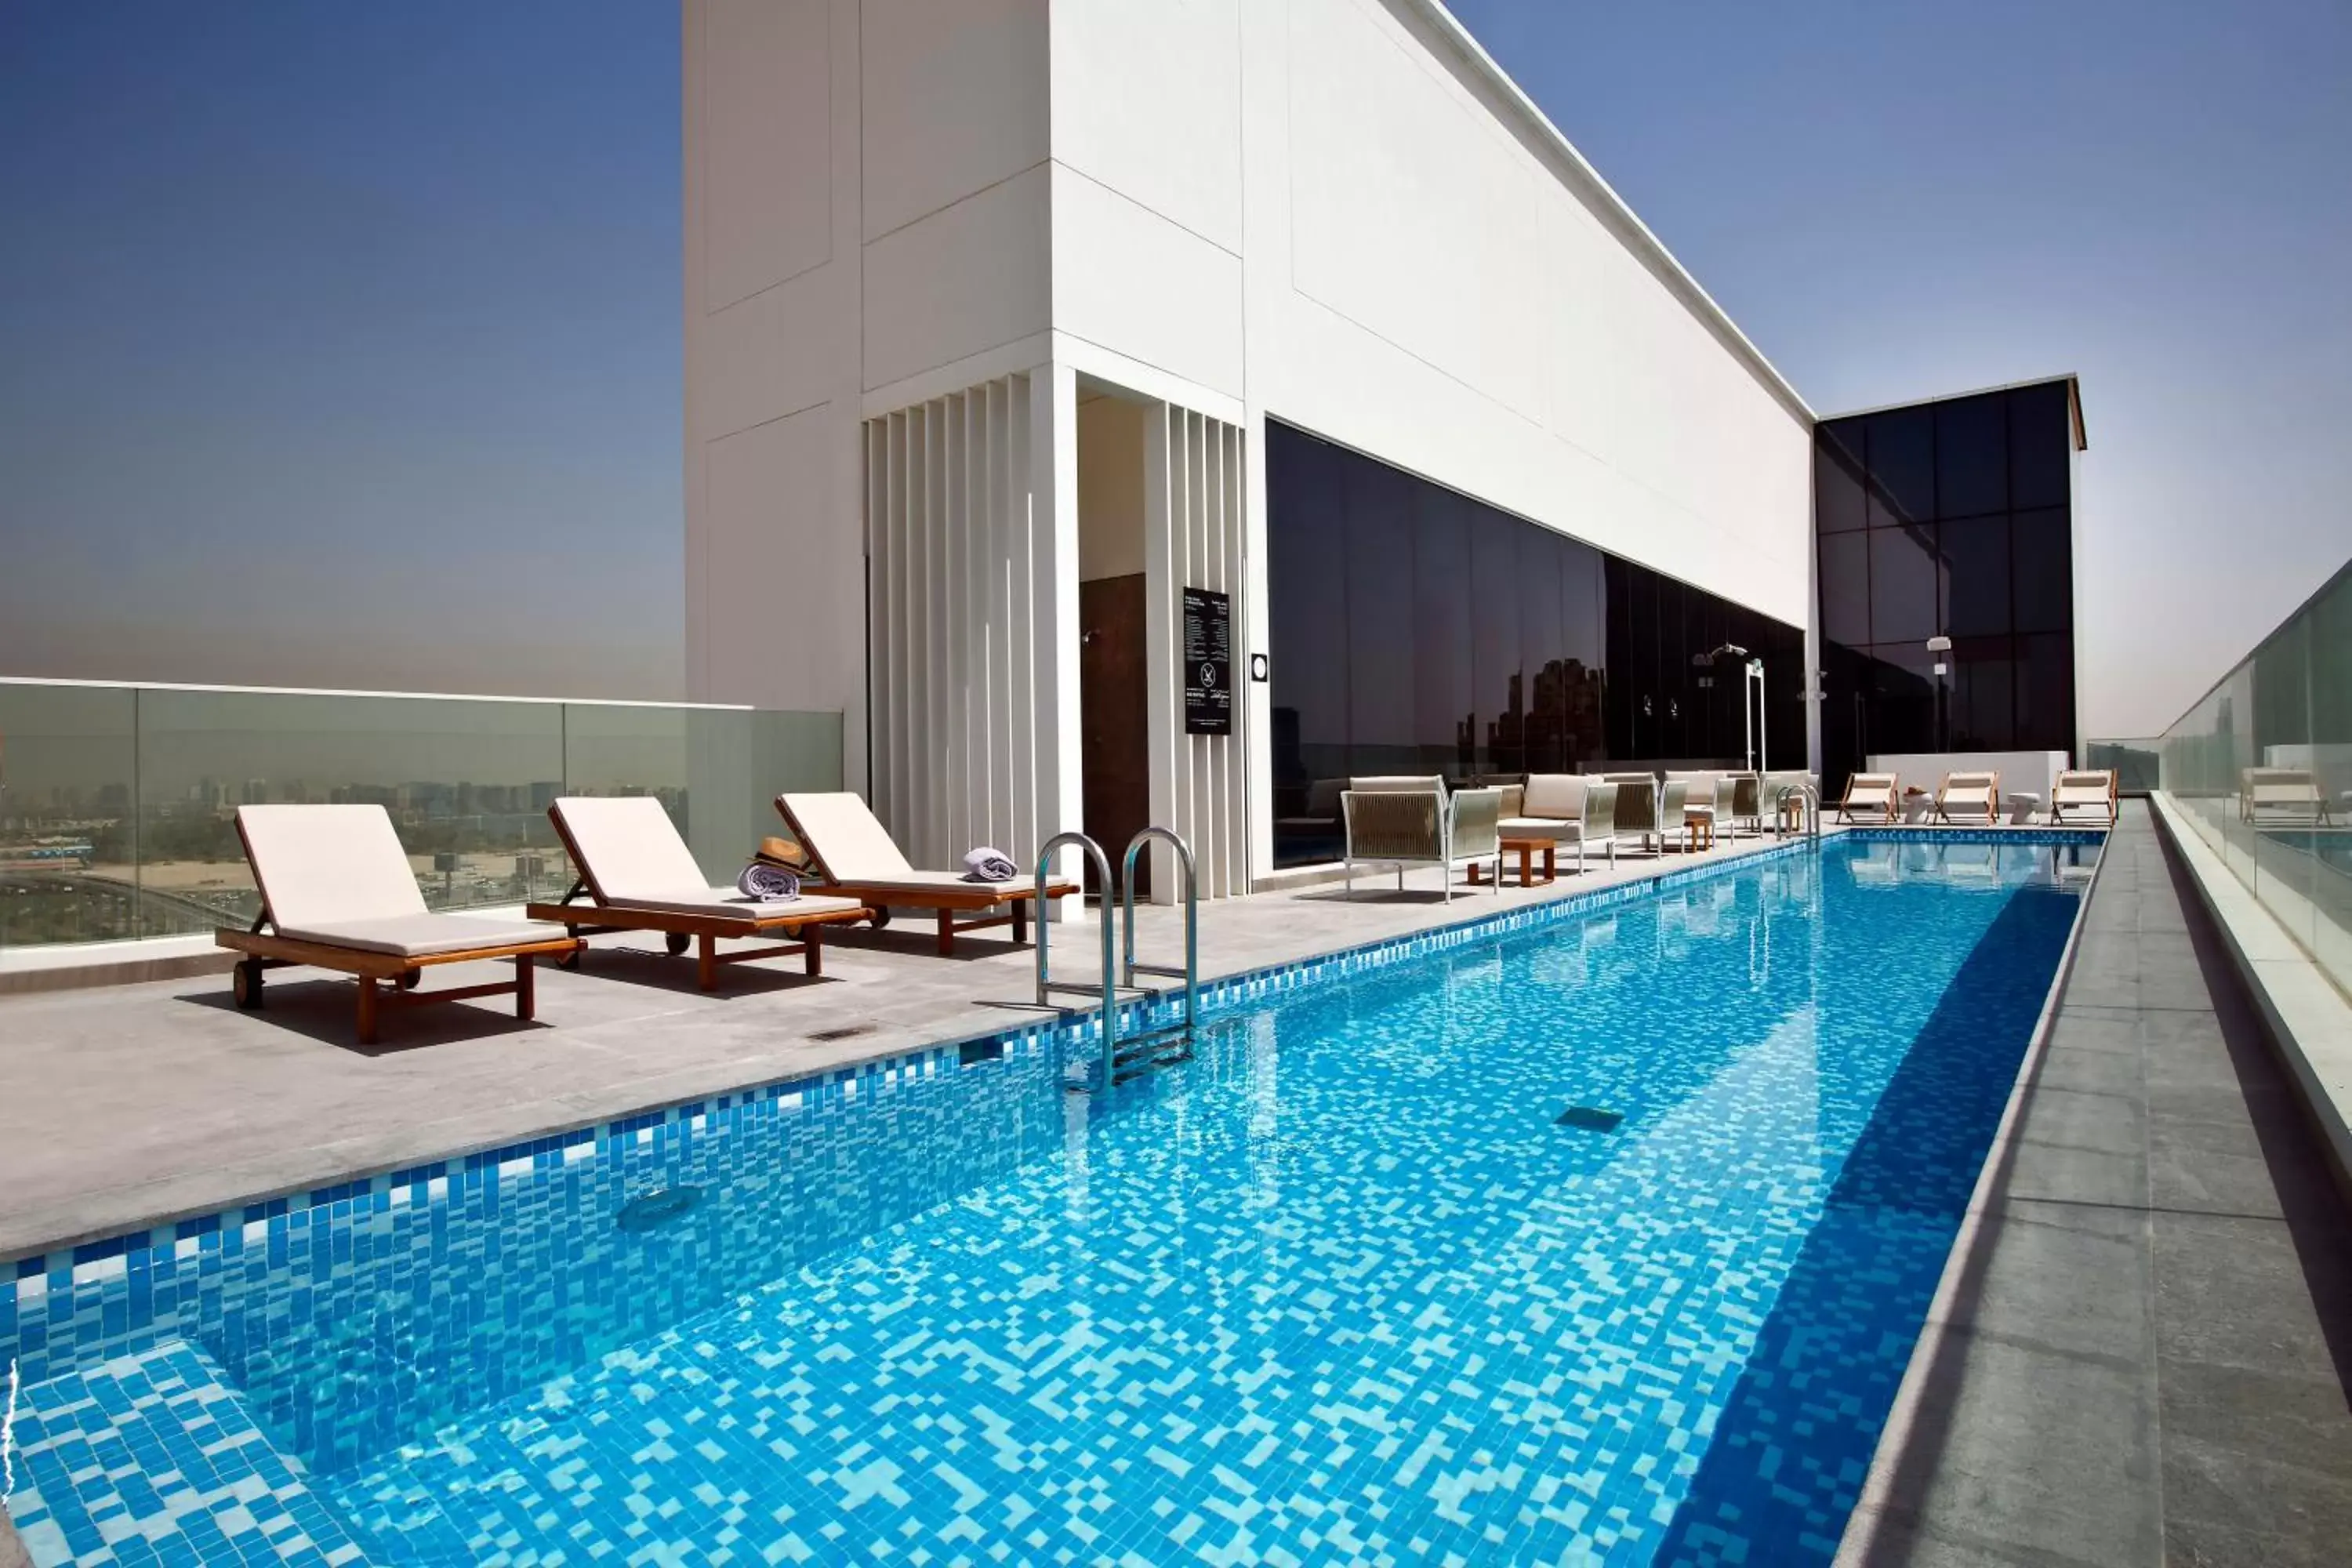 Swimming Pool in FORM Hotel Dubai, a Member of Design Hotels